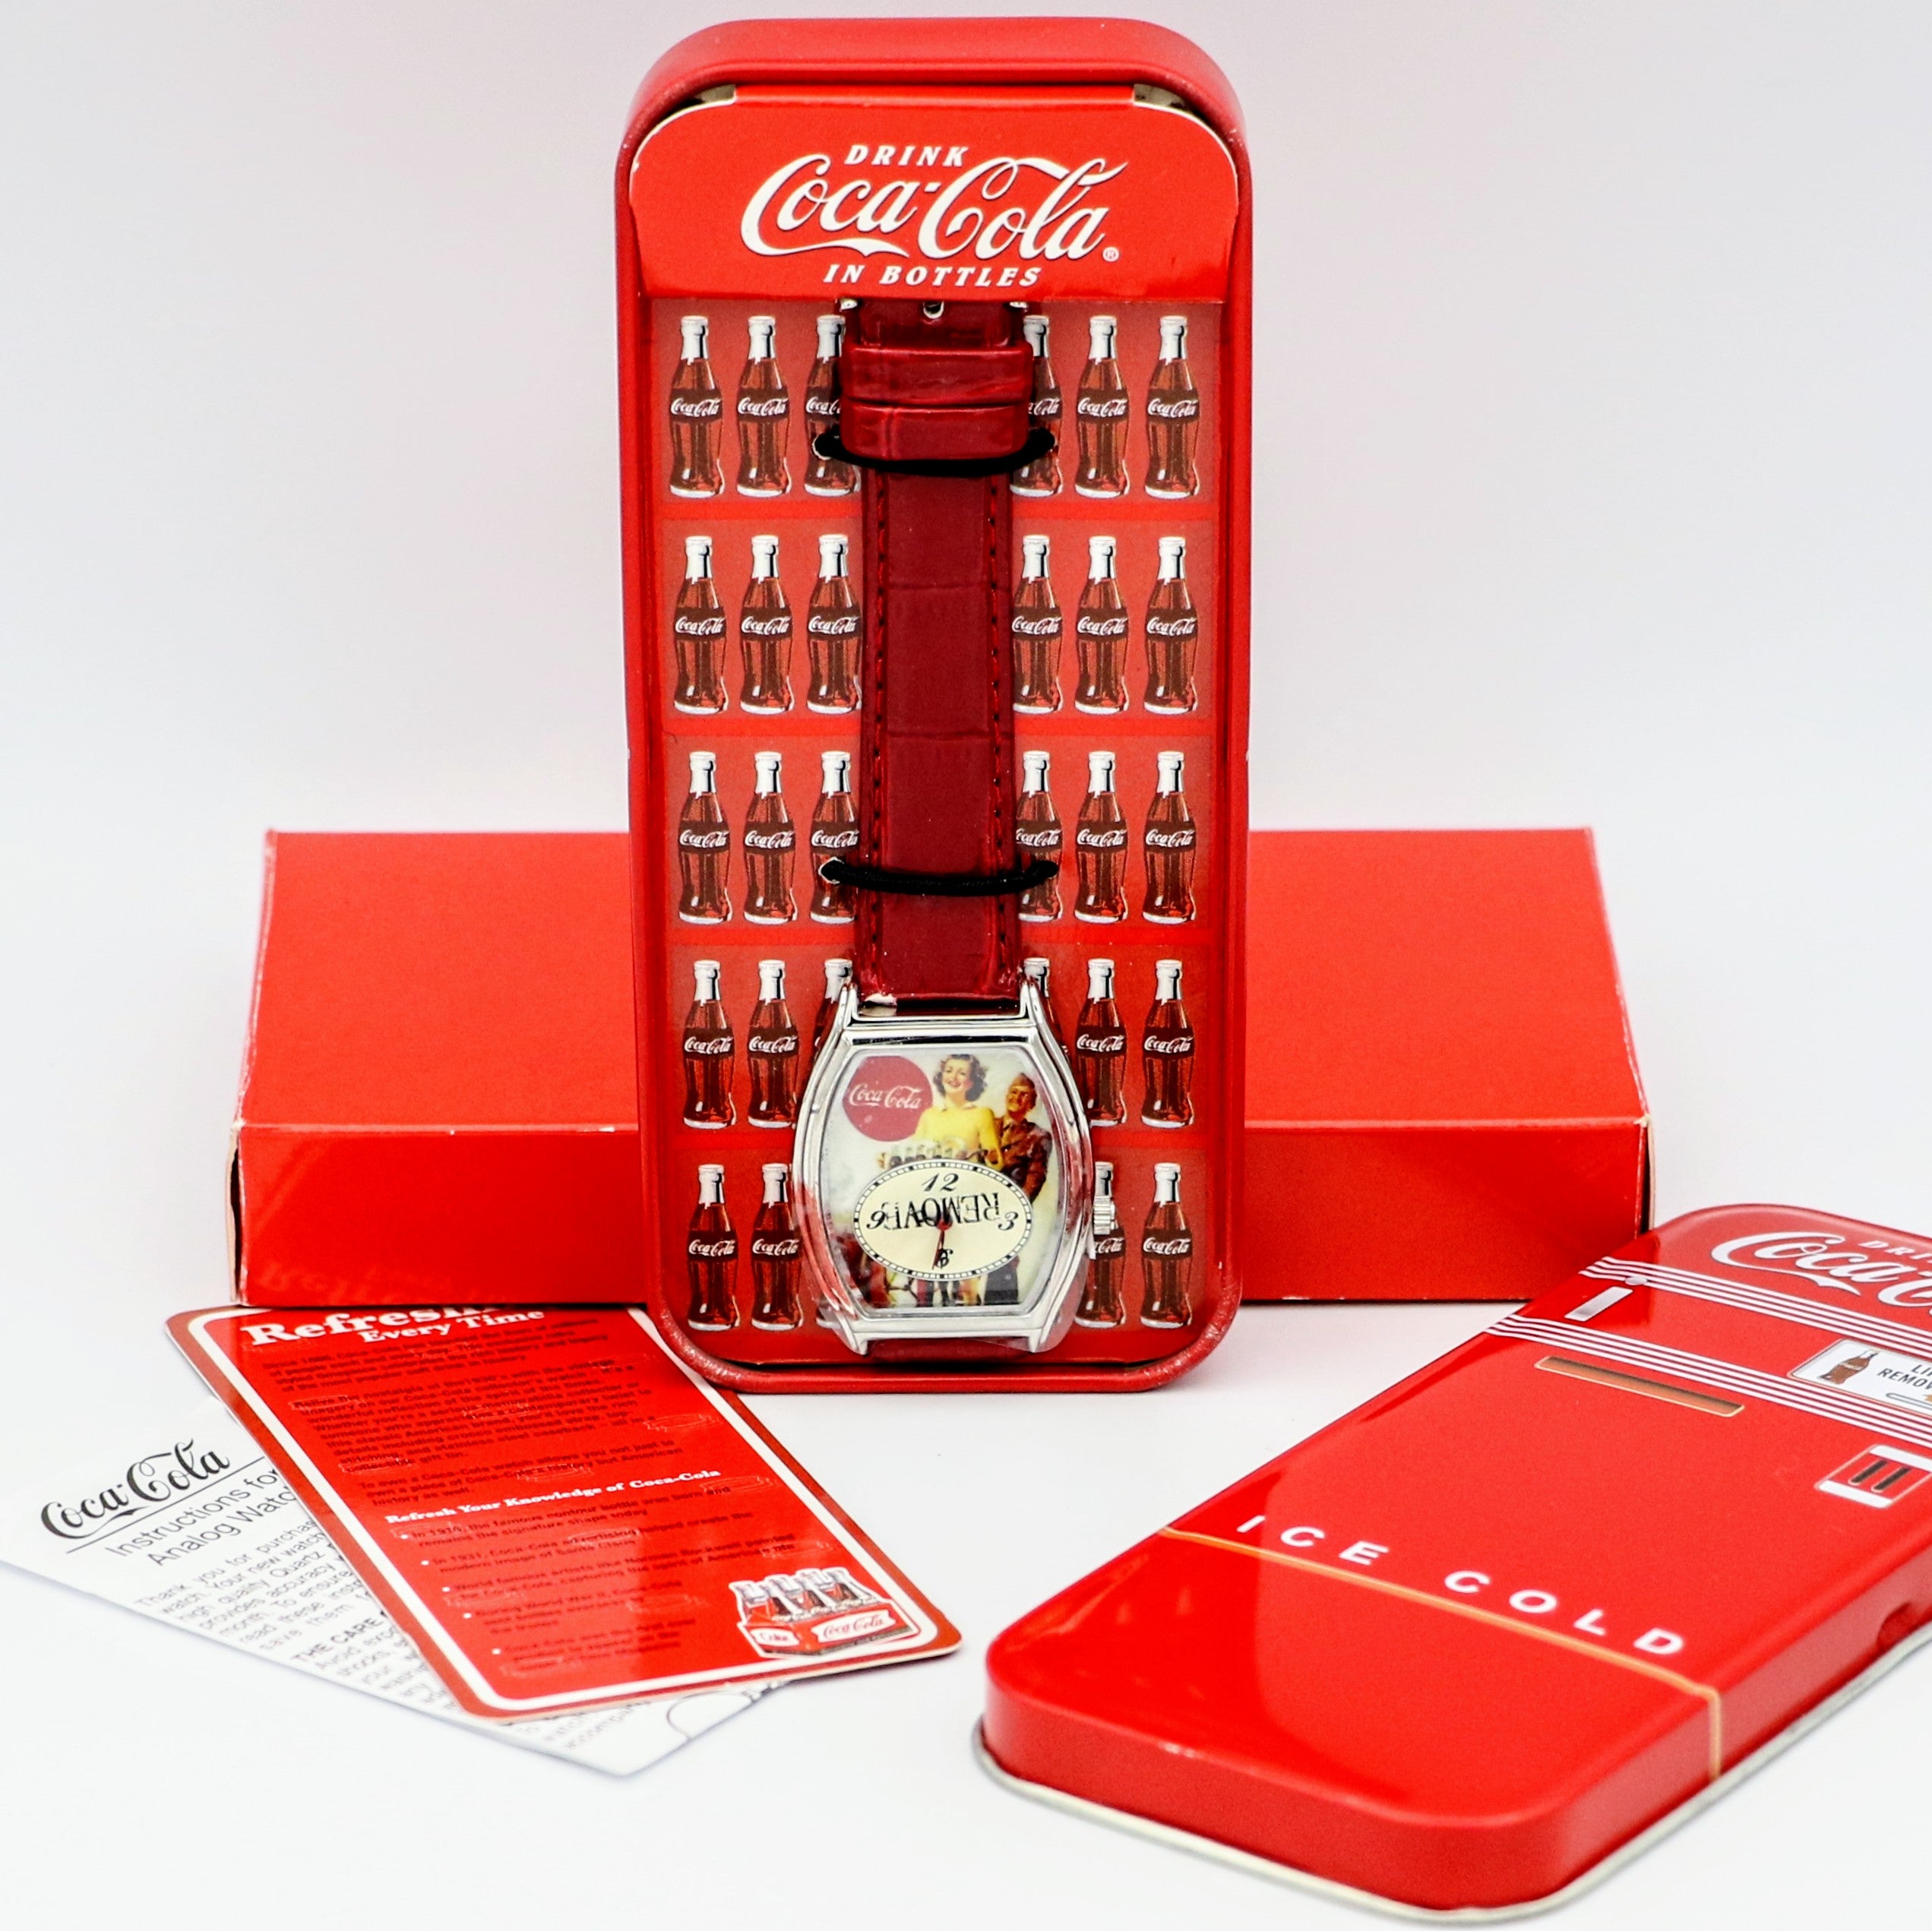 COCA-COLA Promotional Wristwatch Collectible Watch BOX & Papers!